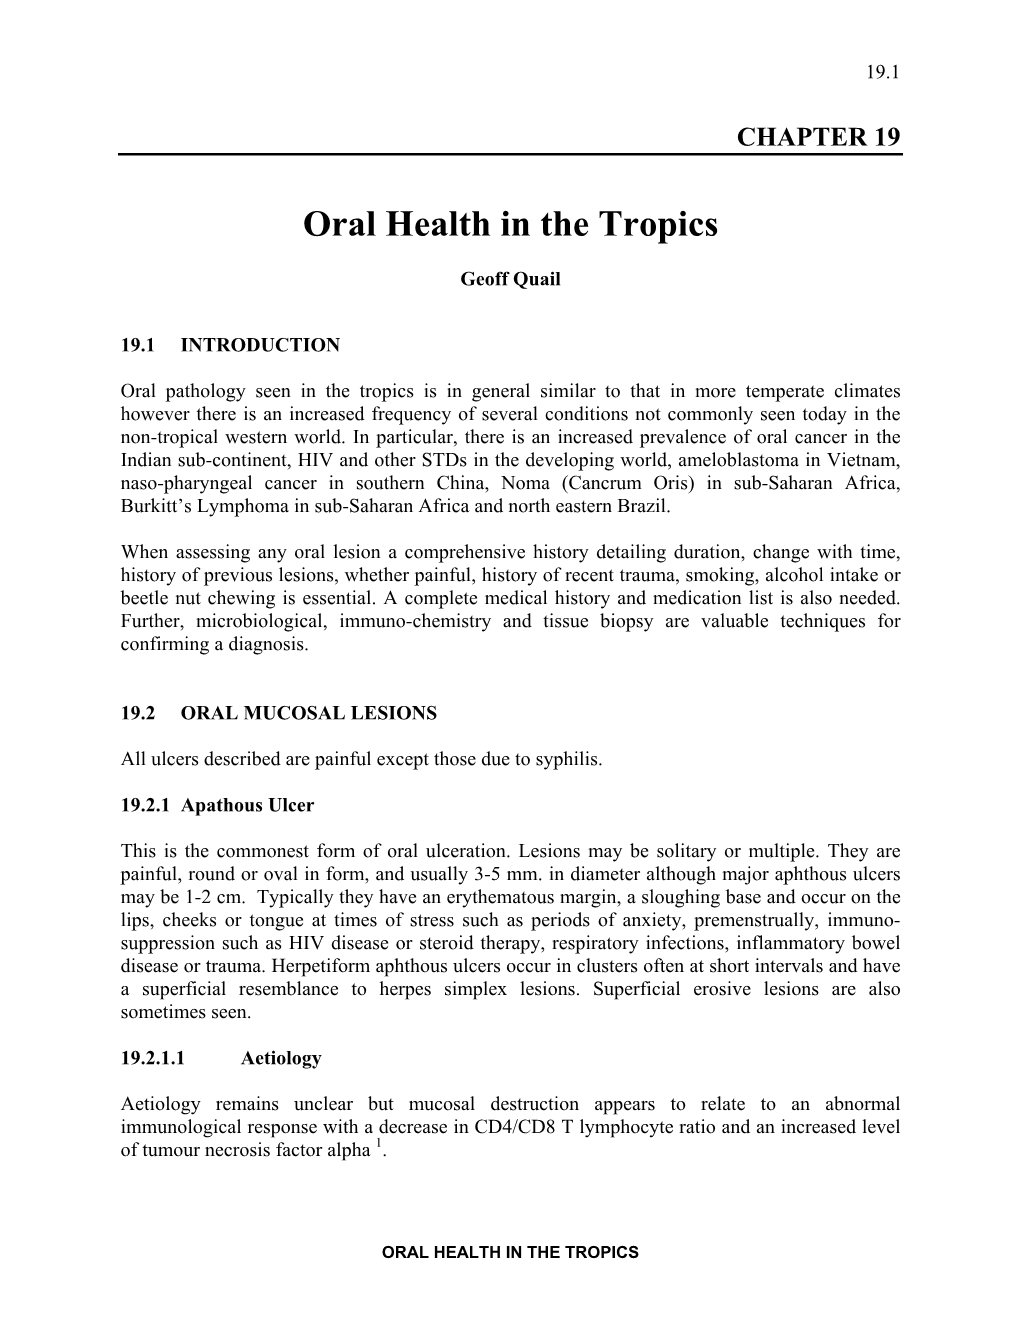 Oral Health and Dental Care in the Tropics